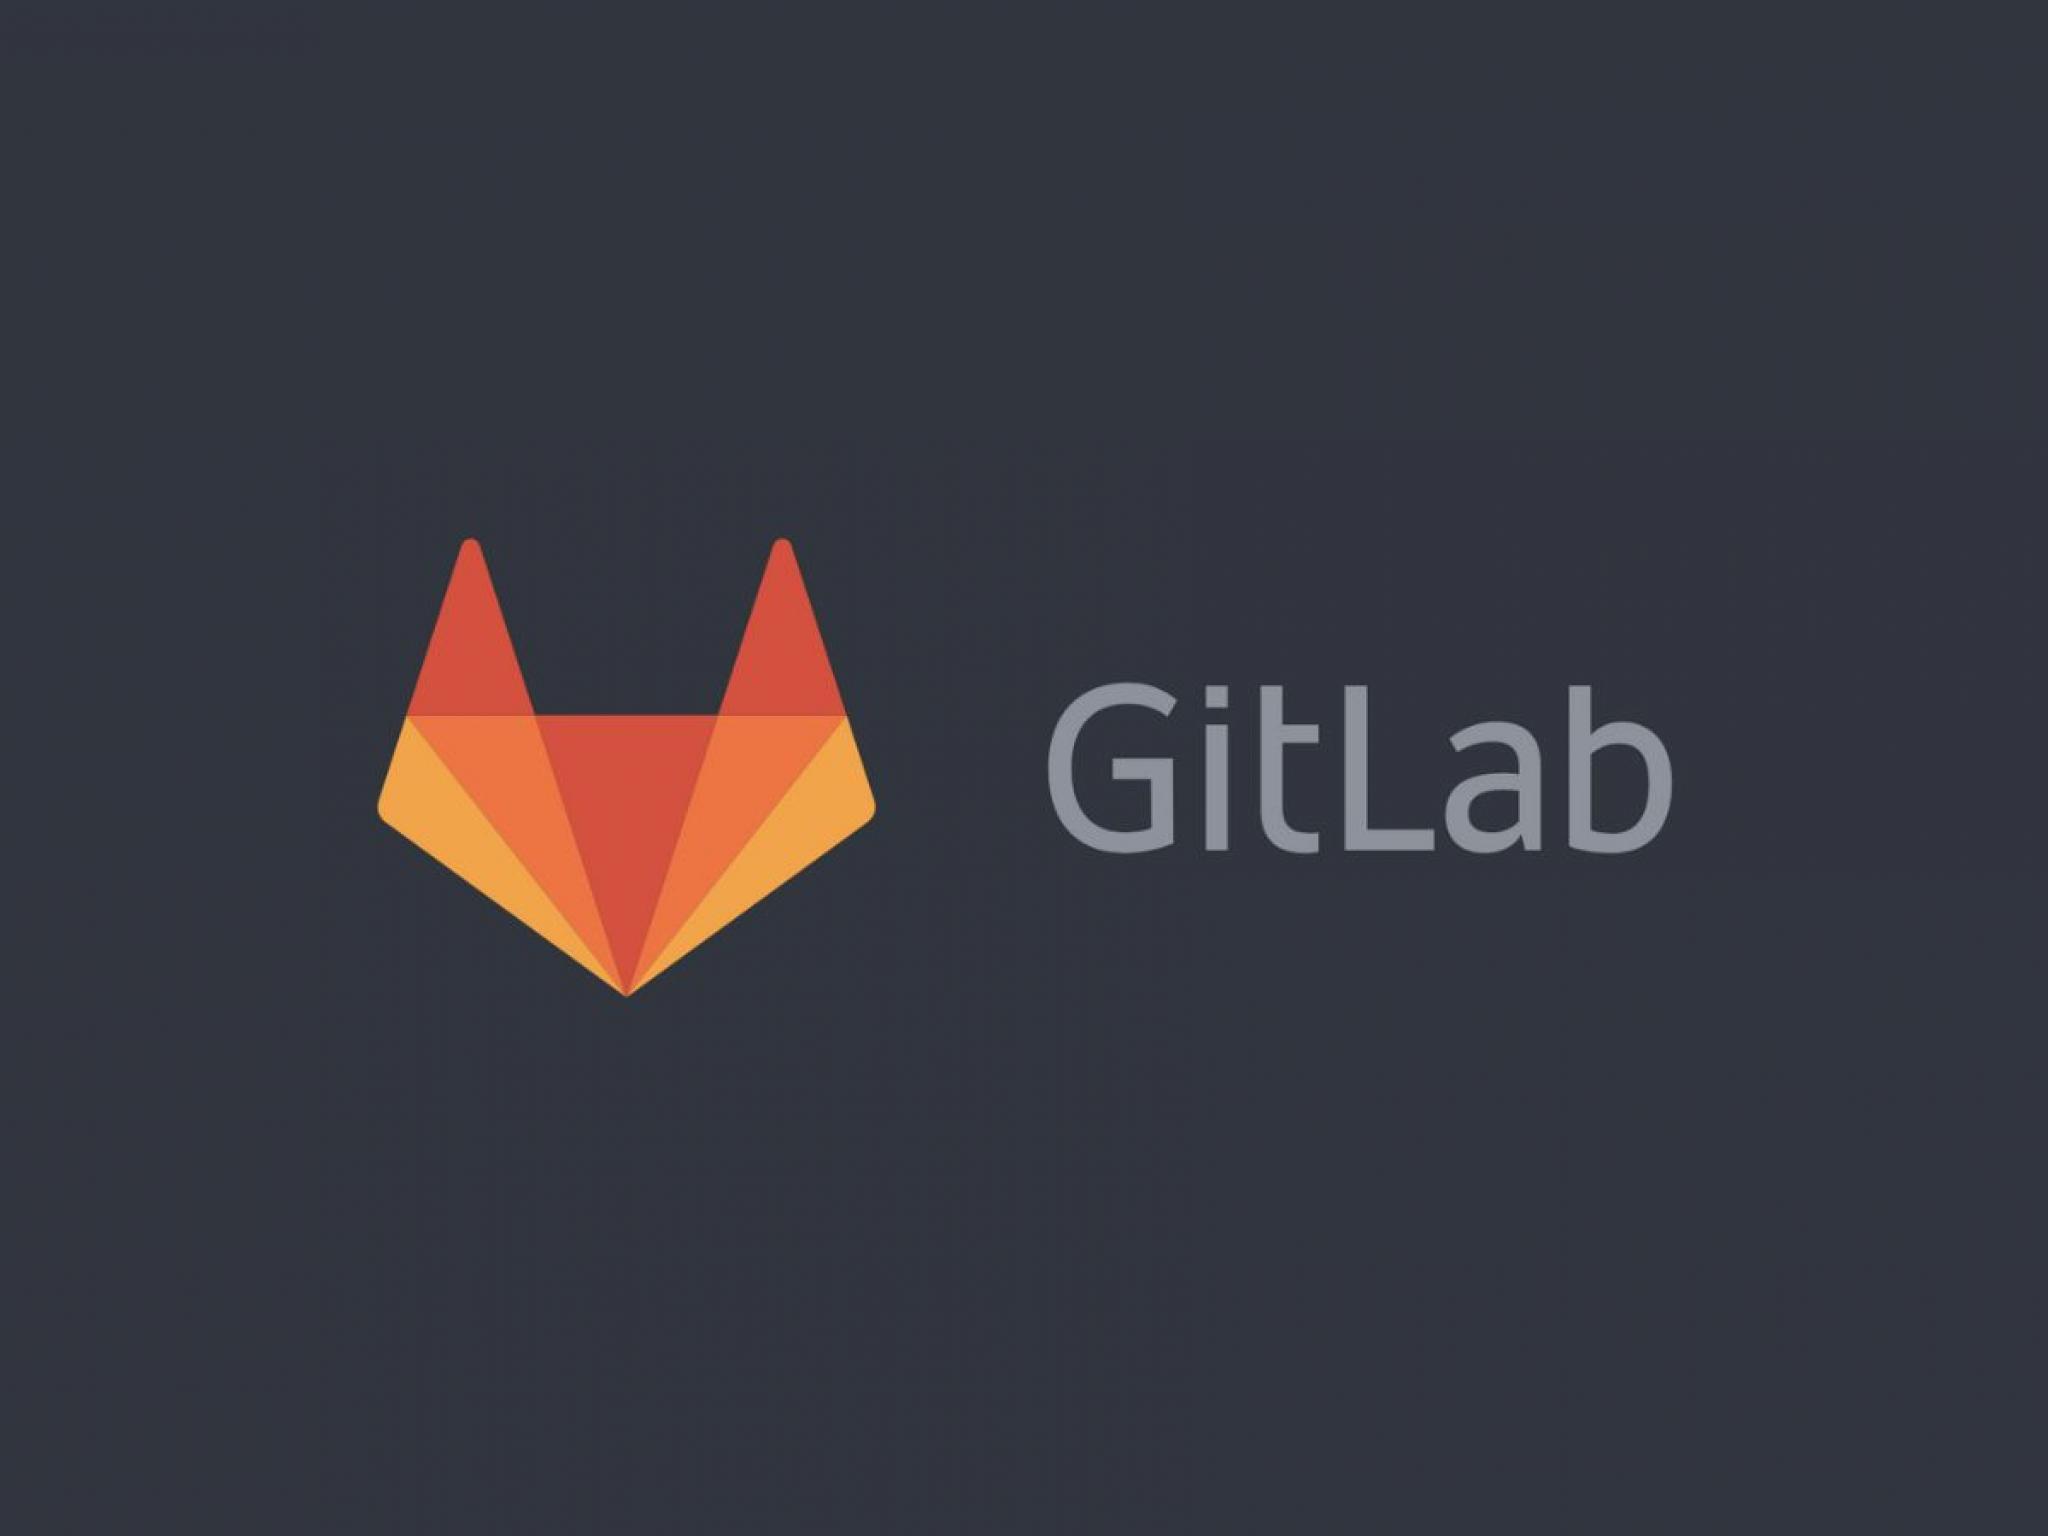  gitlab-issues-weak-earnings-forecast-joins-stitch-fix-albemarle-and-other-big-stocks-moving-lower-in-tuesdays-pre-market-session 